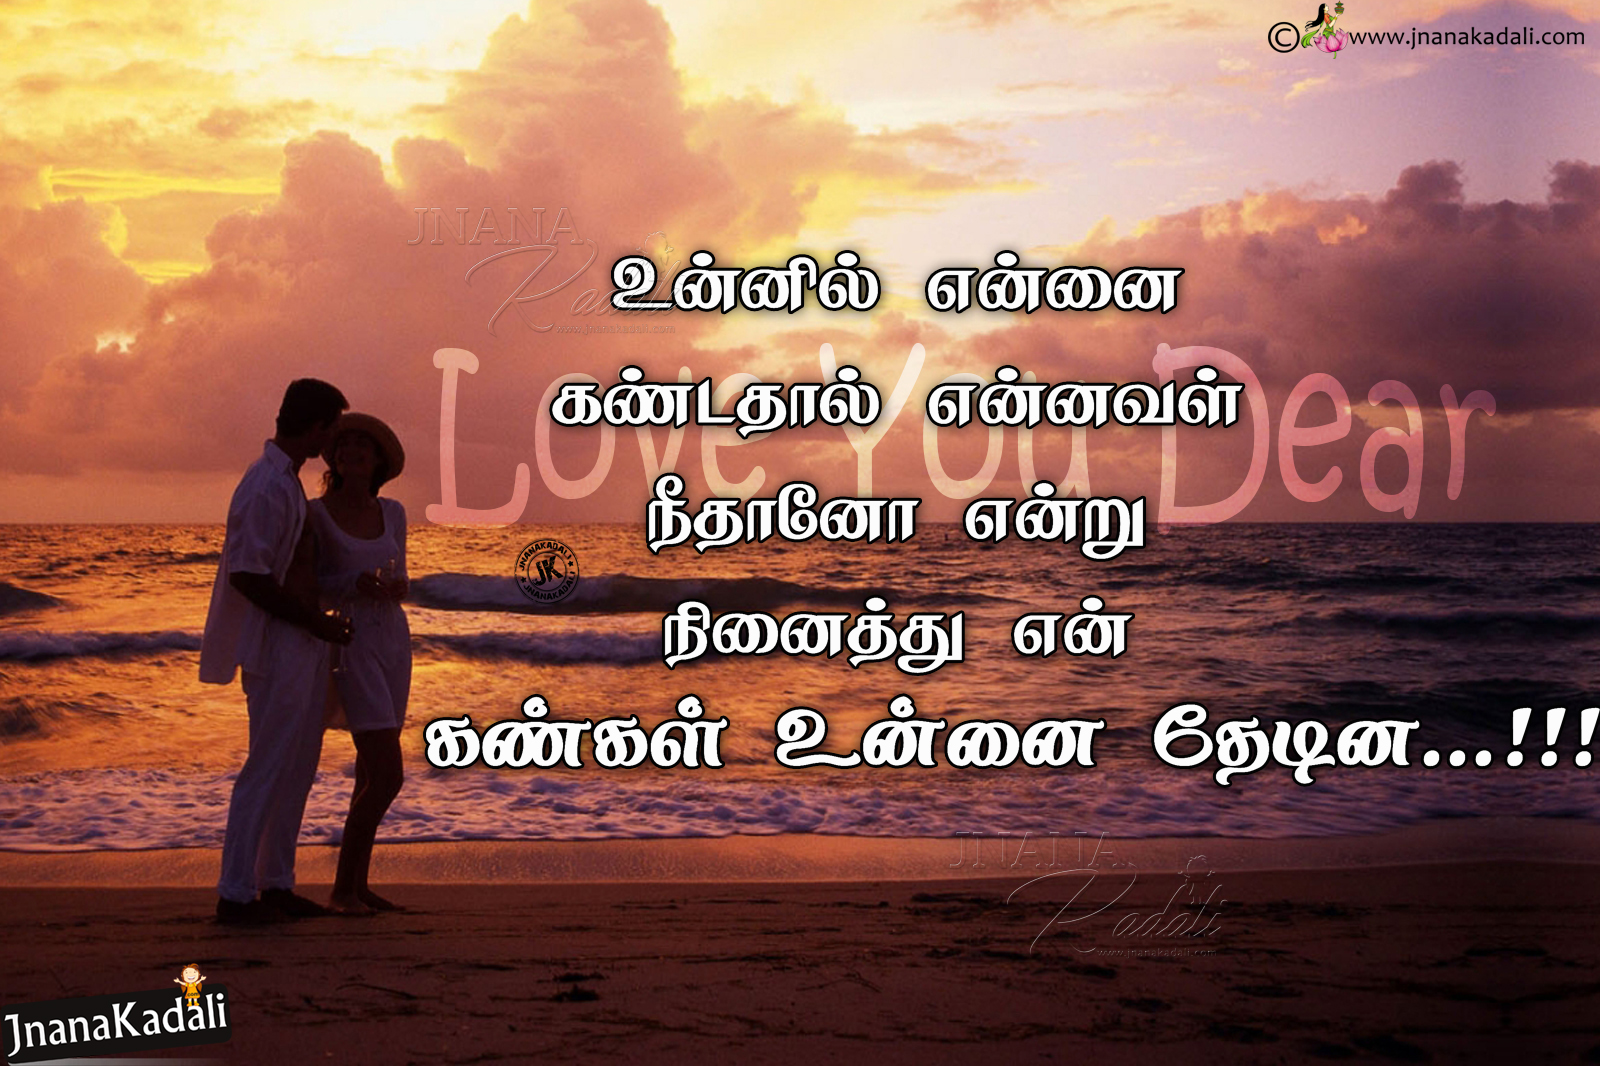 Love Quotes in Tamil,Collection of latest heart touching Tamil love quotes,...